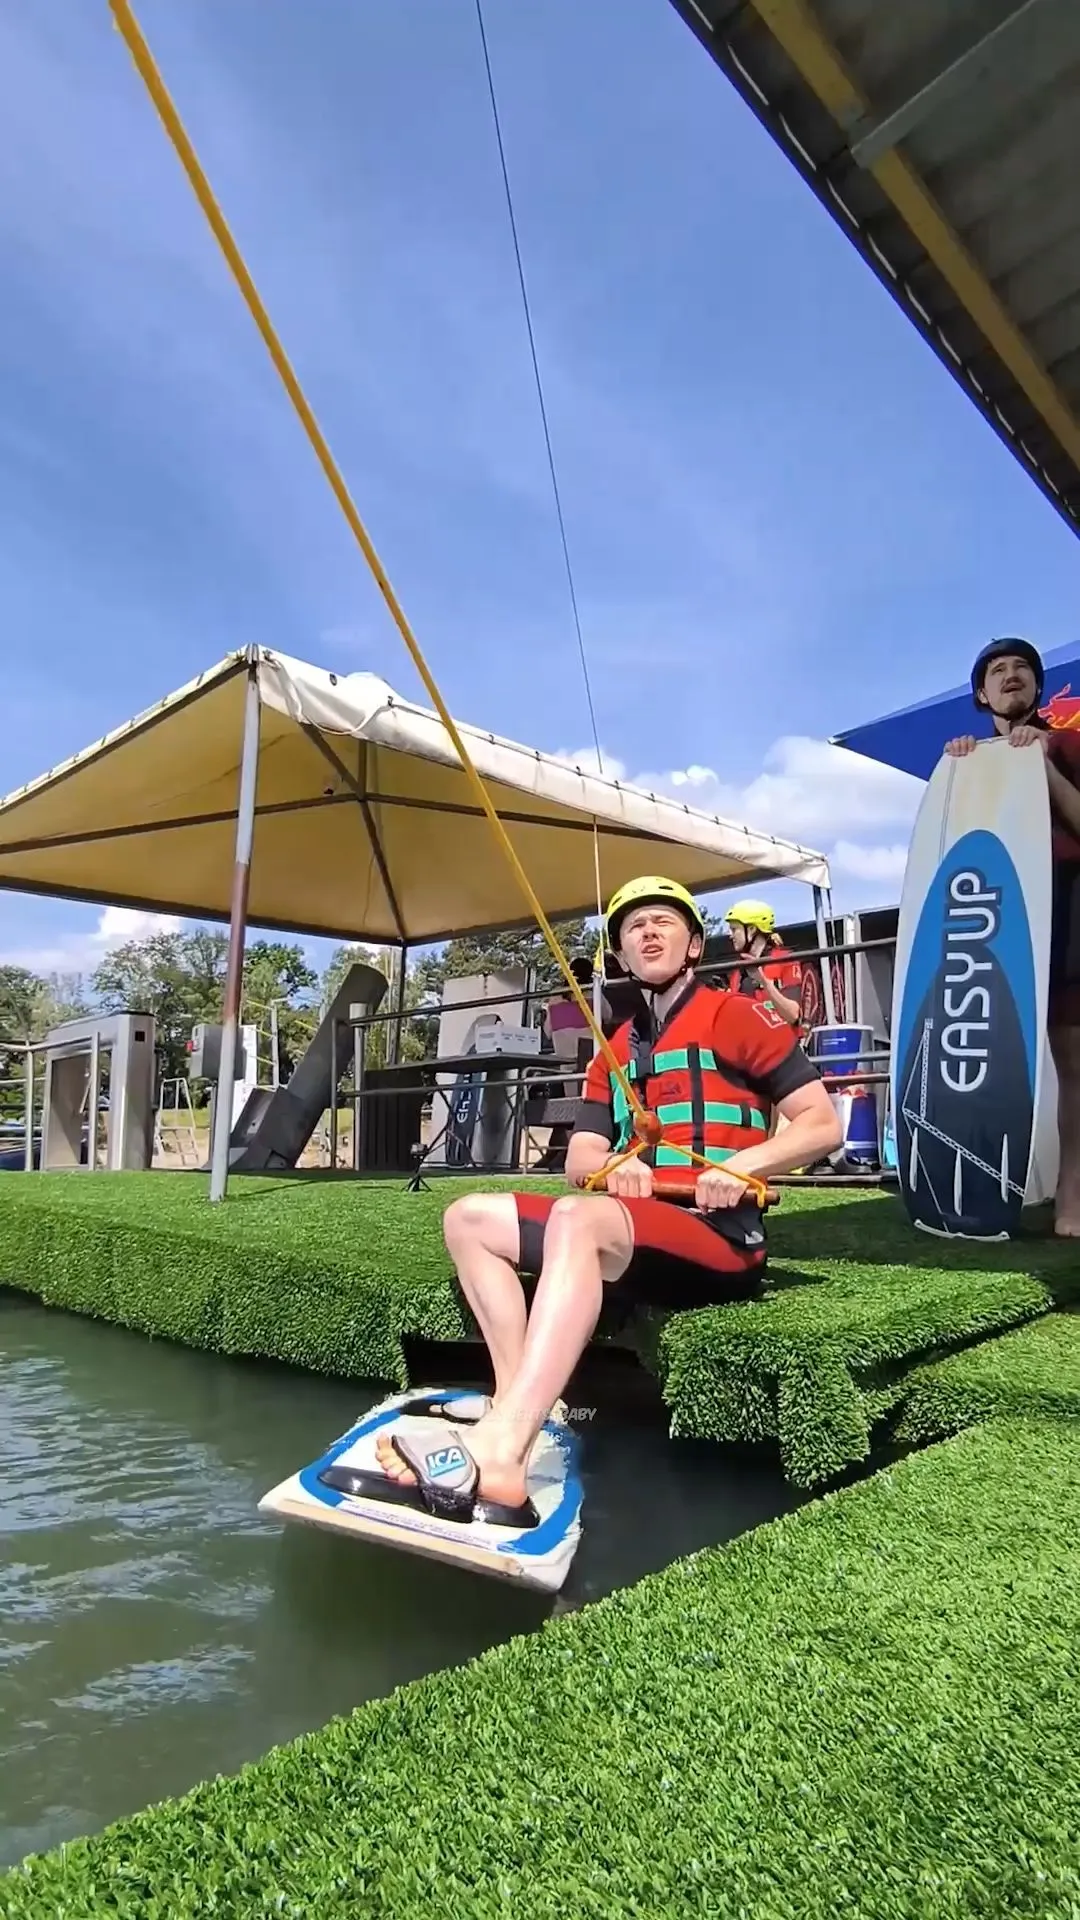 Wakeboarden in Hannover – Highlights von Tag 4 bei Can You Make It